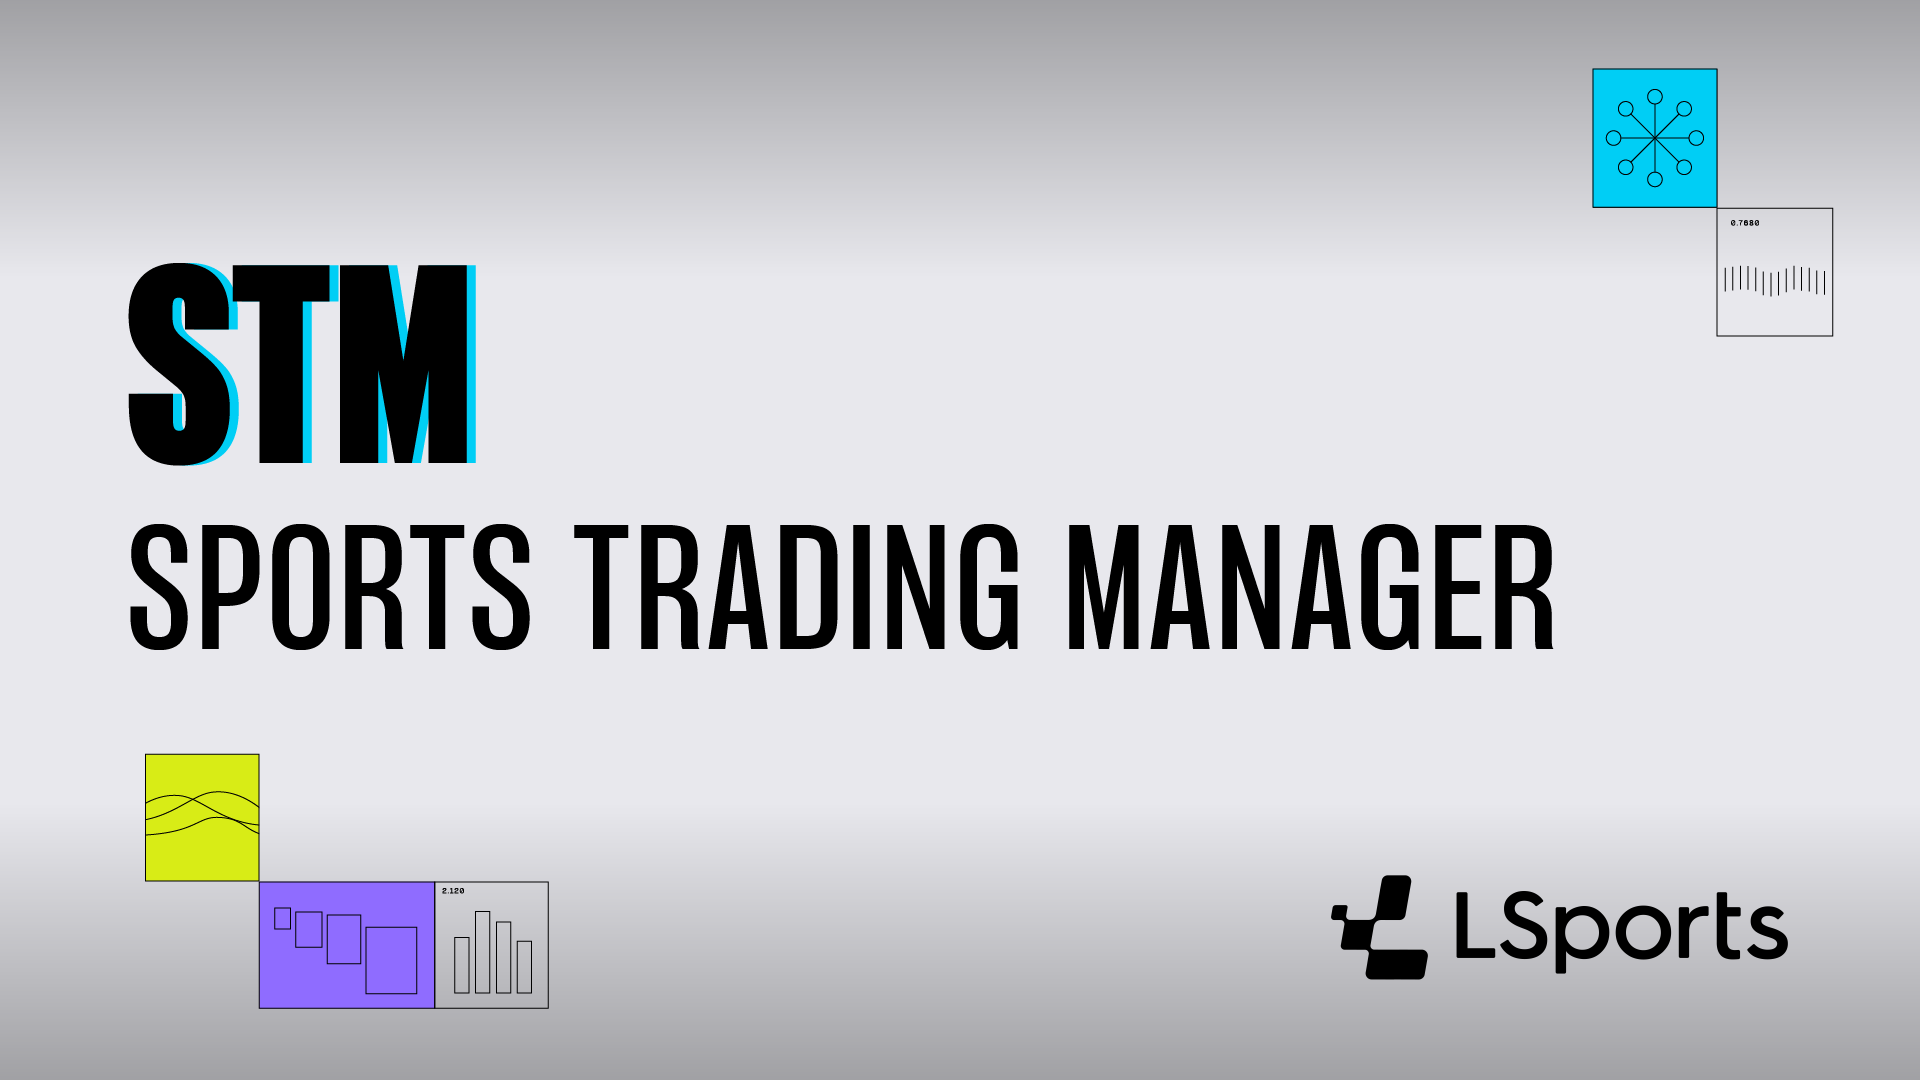 STM Sports Trading Manager